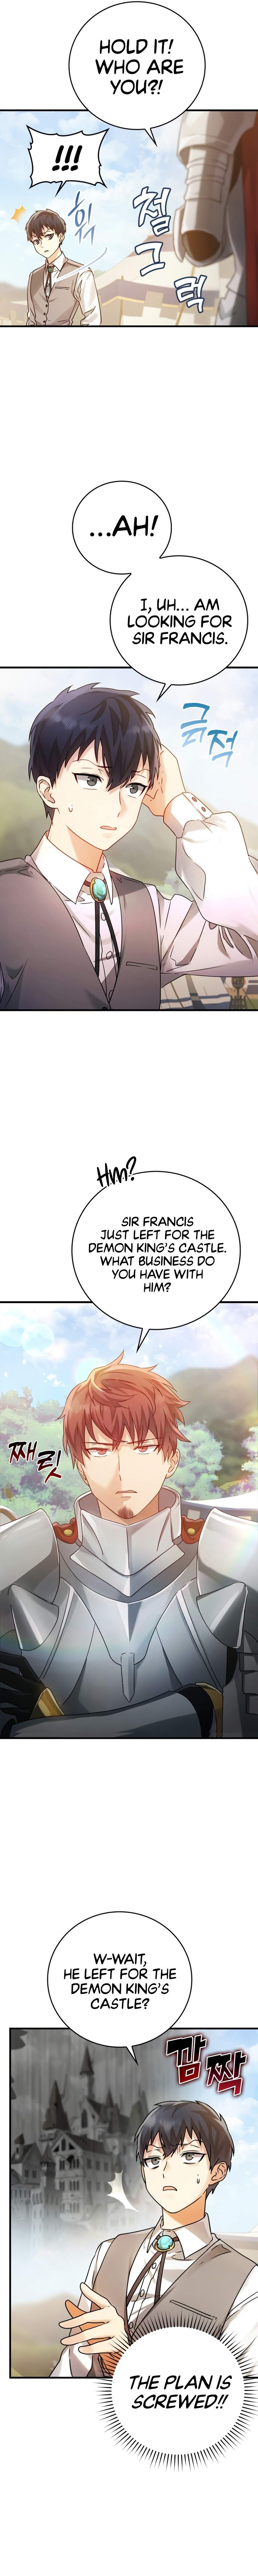 The Demon Prince goes to the Academy - Chapter 4 Page 8